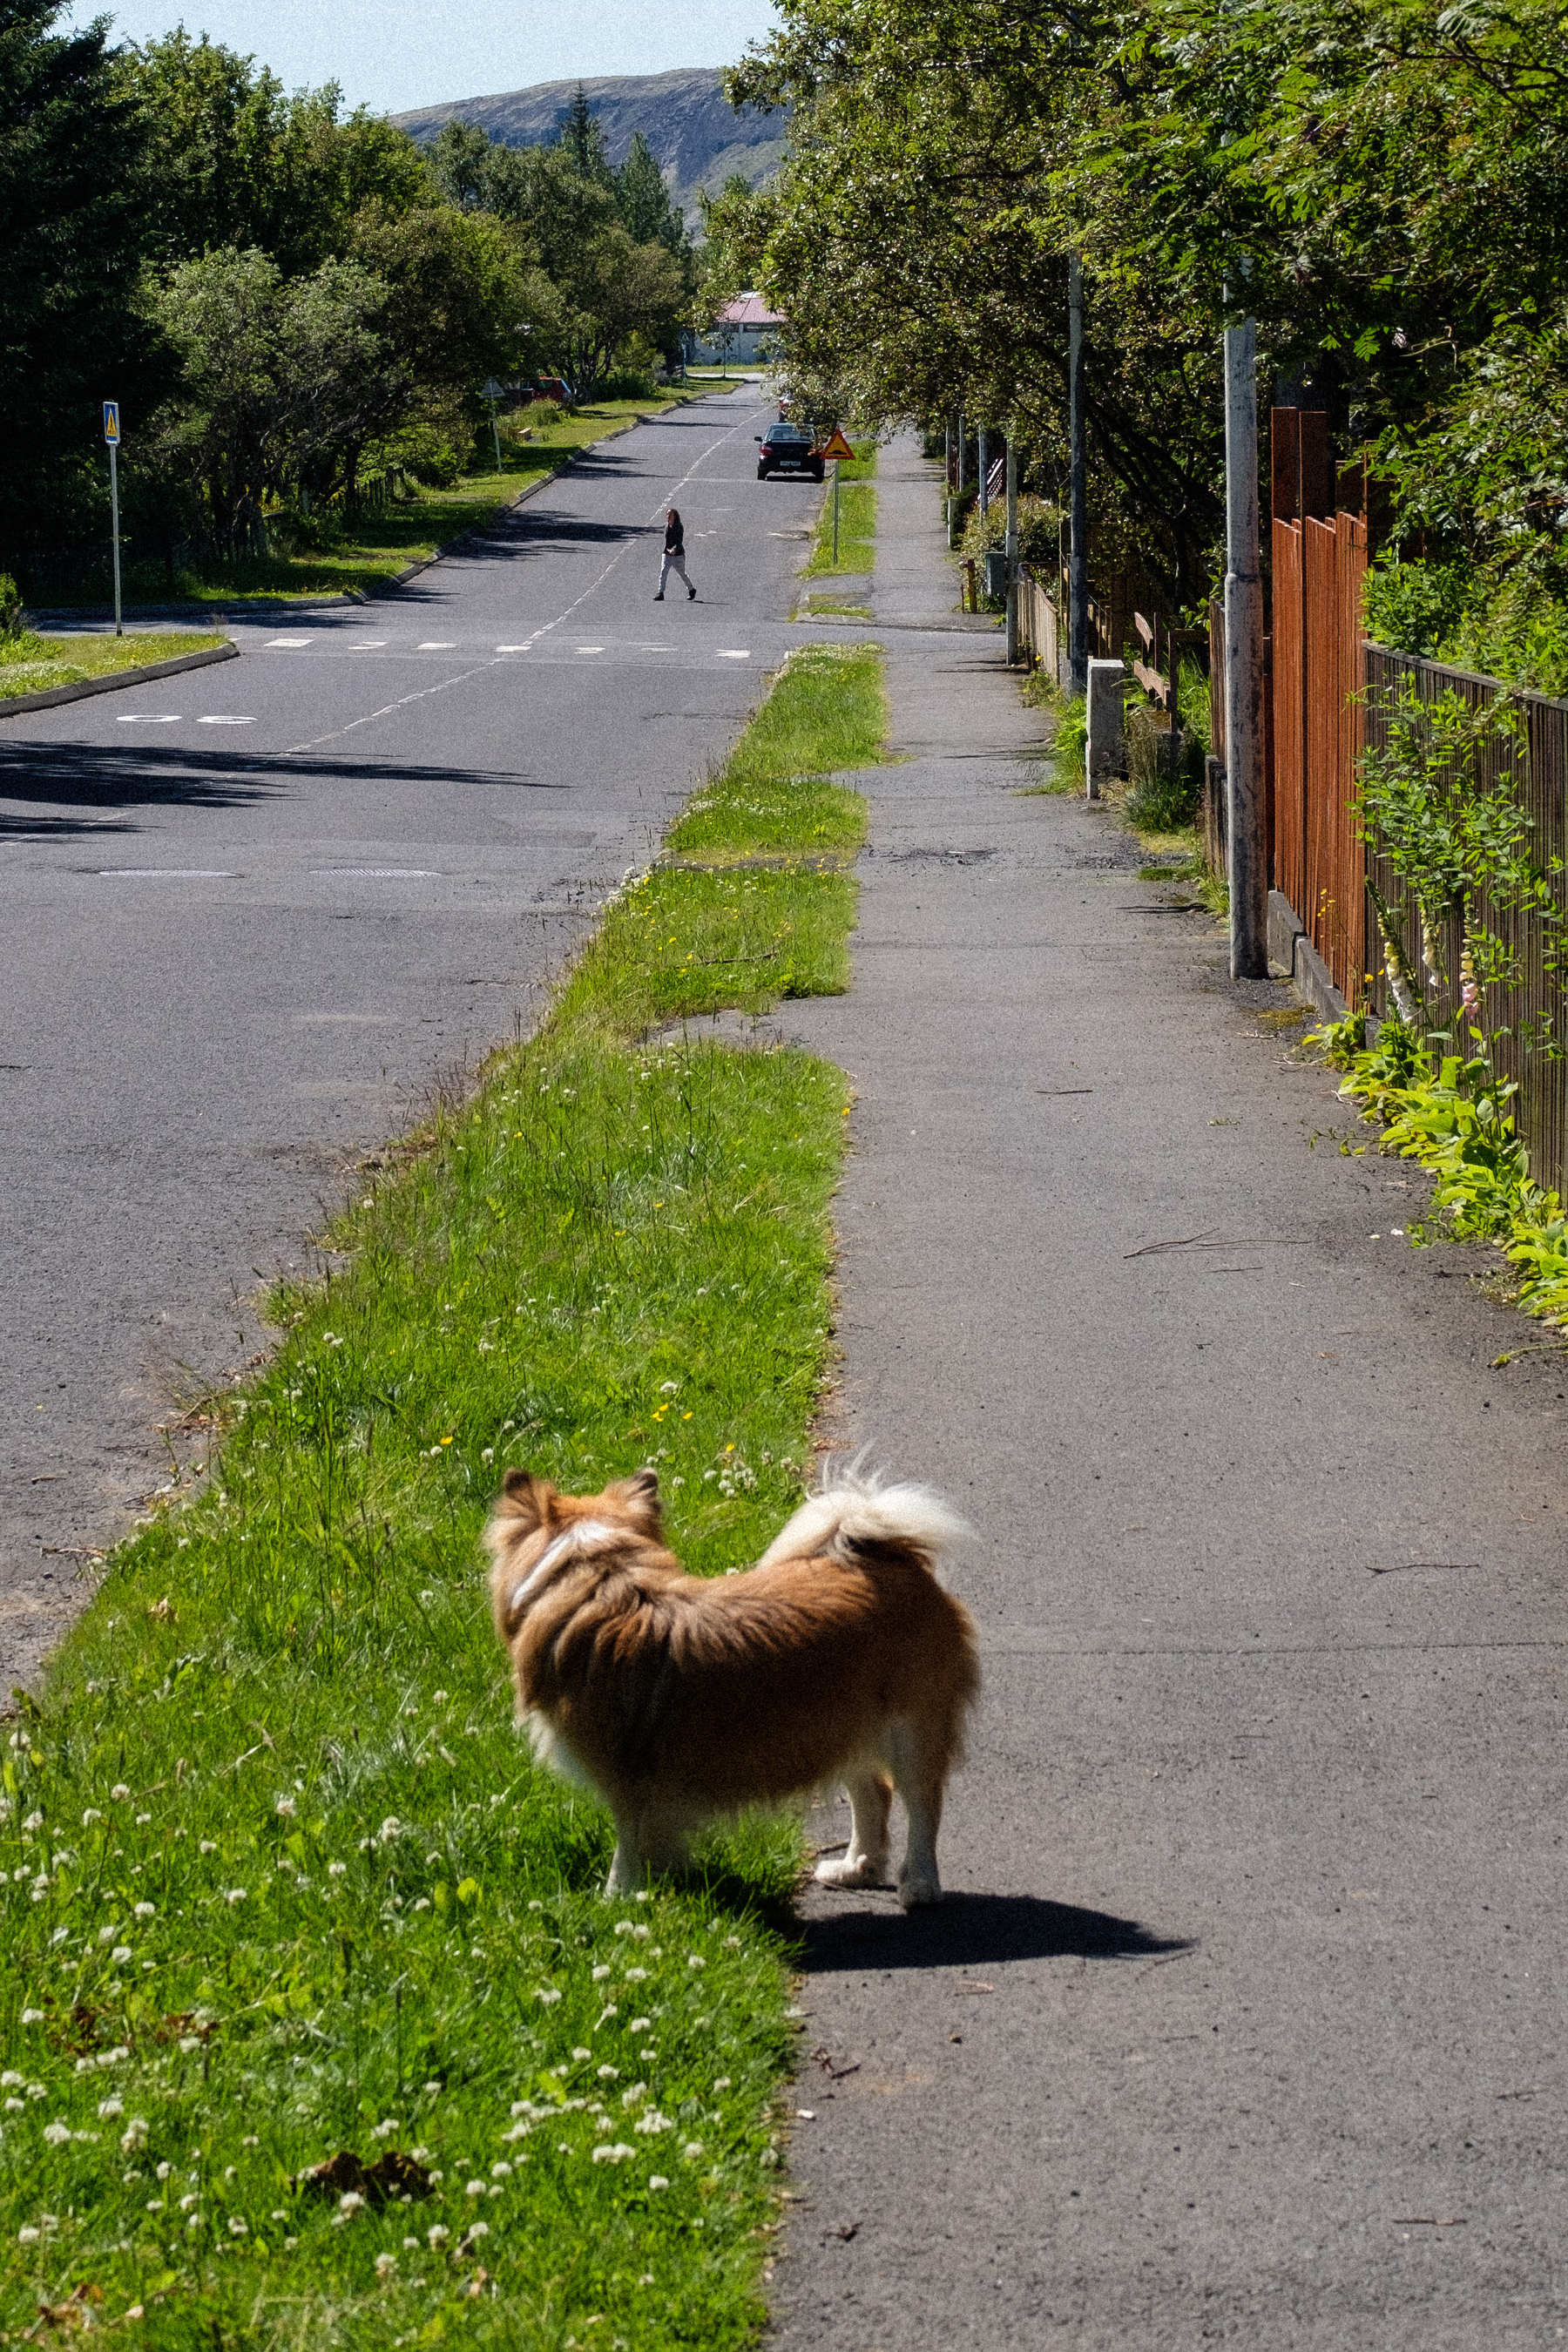 An Icelandic dog (that’s a breed, not a nationality, although it’s probably Icelandic too, I didn’t ask it) stares down the road at a pedestrian in the distance.